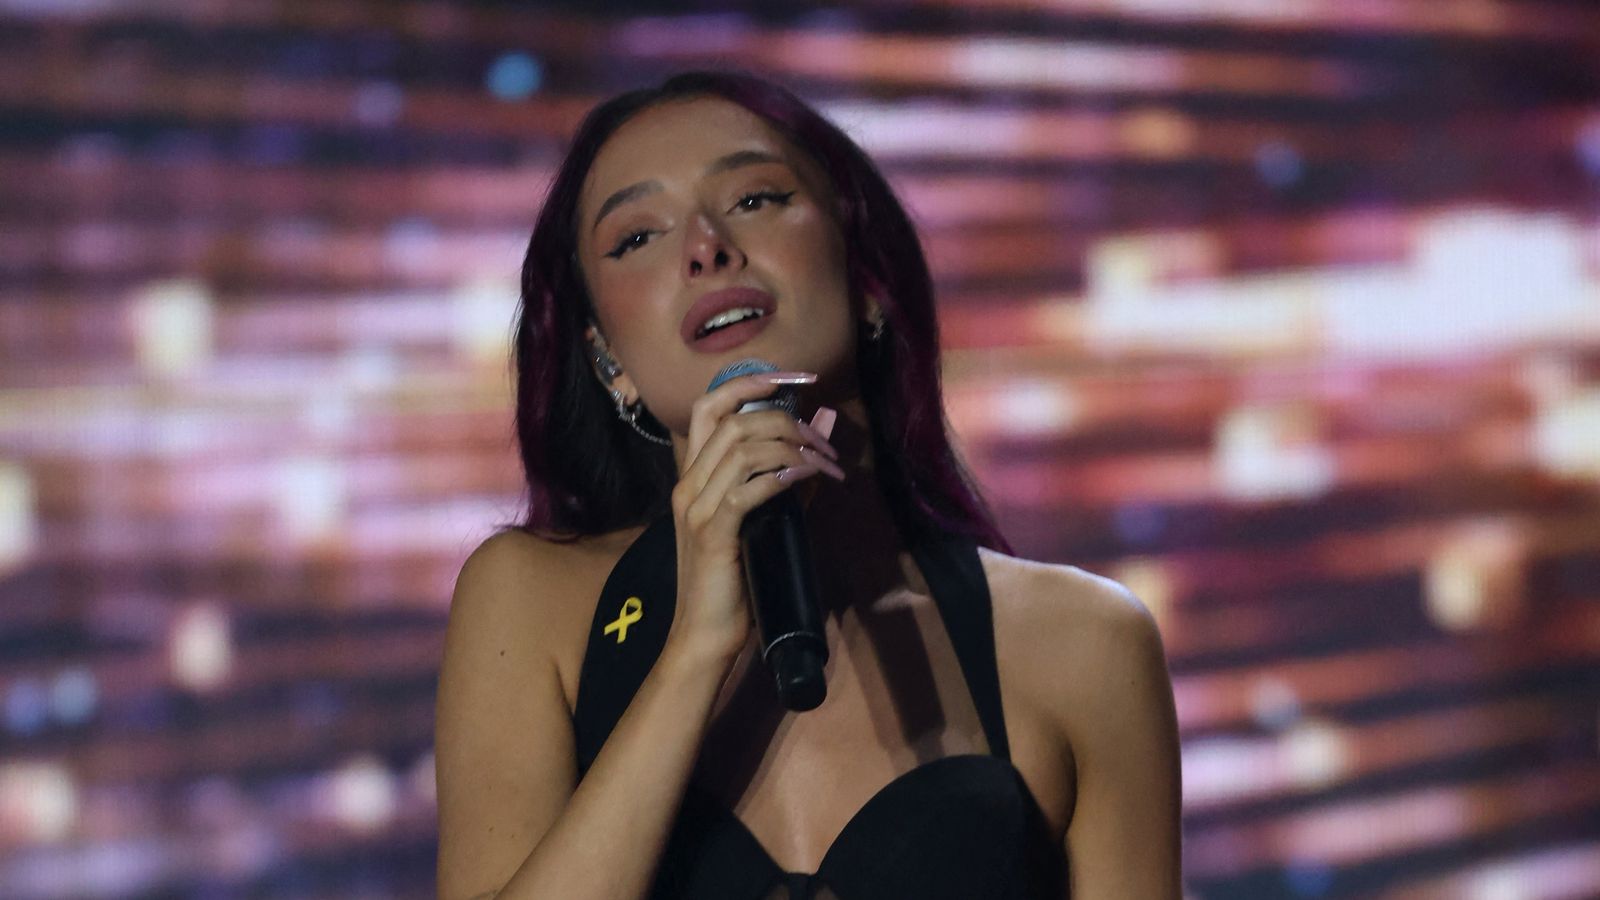 Israel  allowed to compete in Eurovision after changing controversial song lyrics